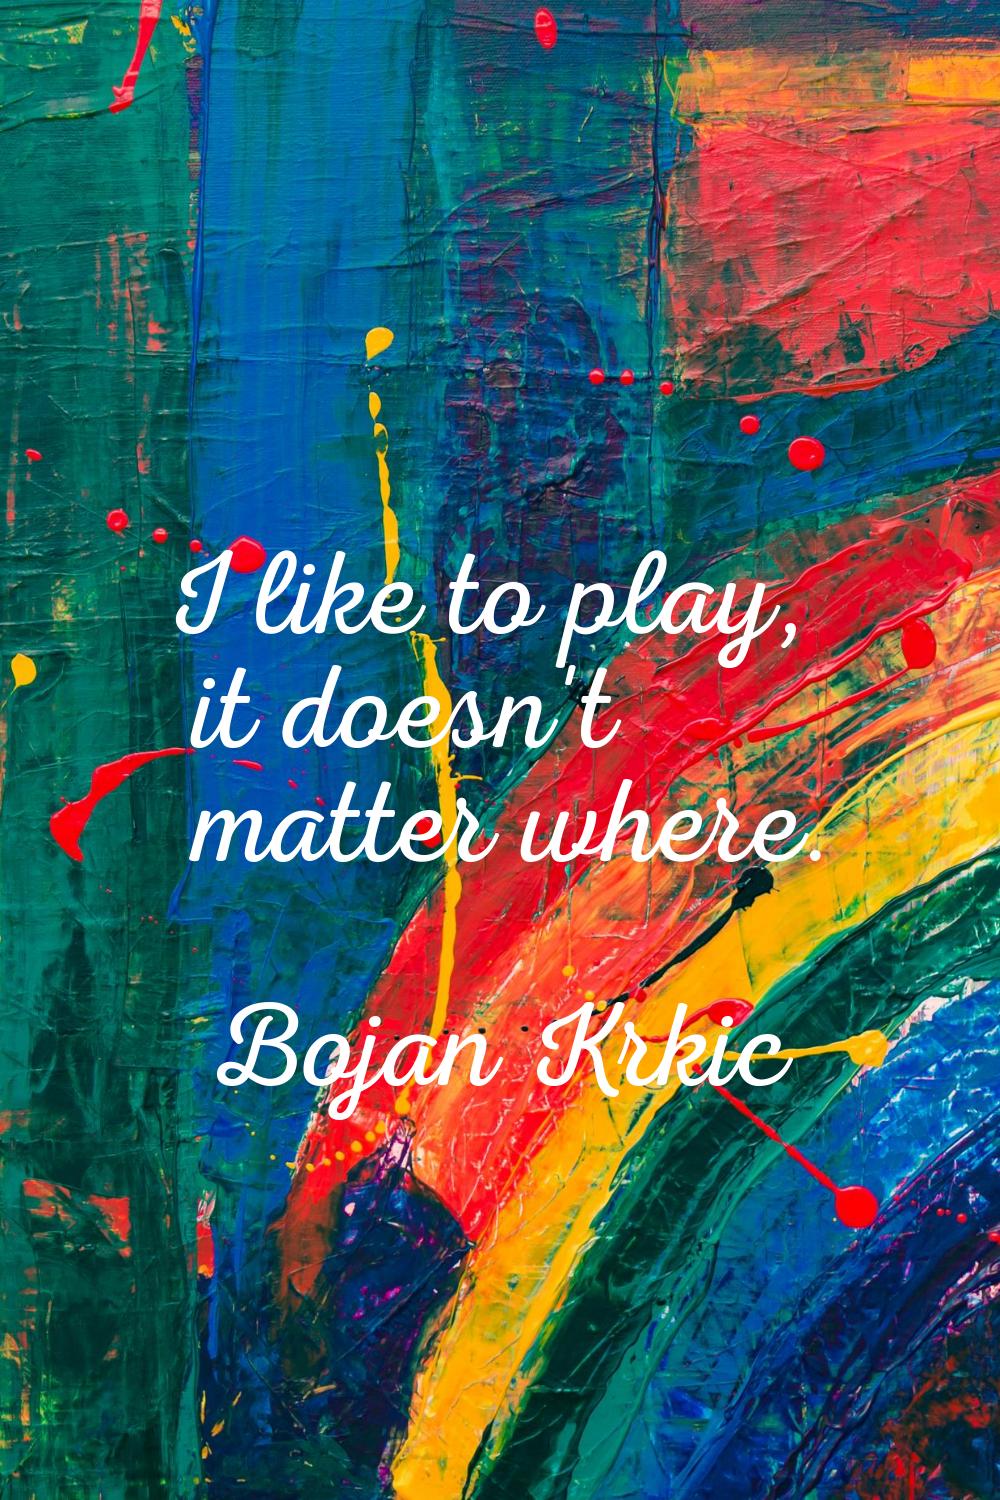 I like to play, it doesn't matter where.